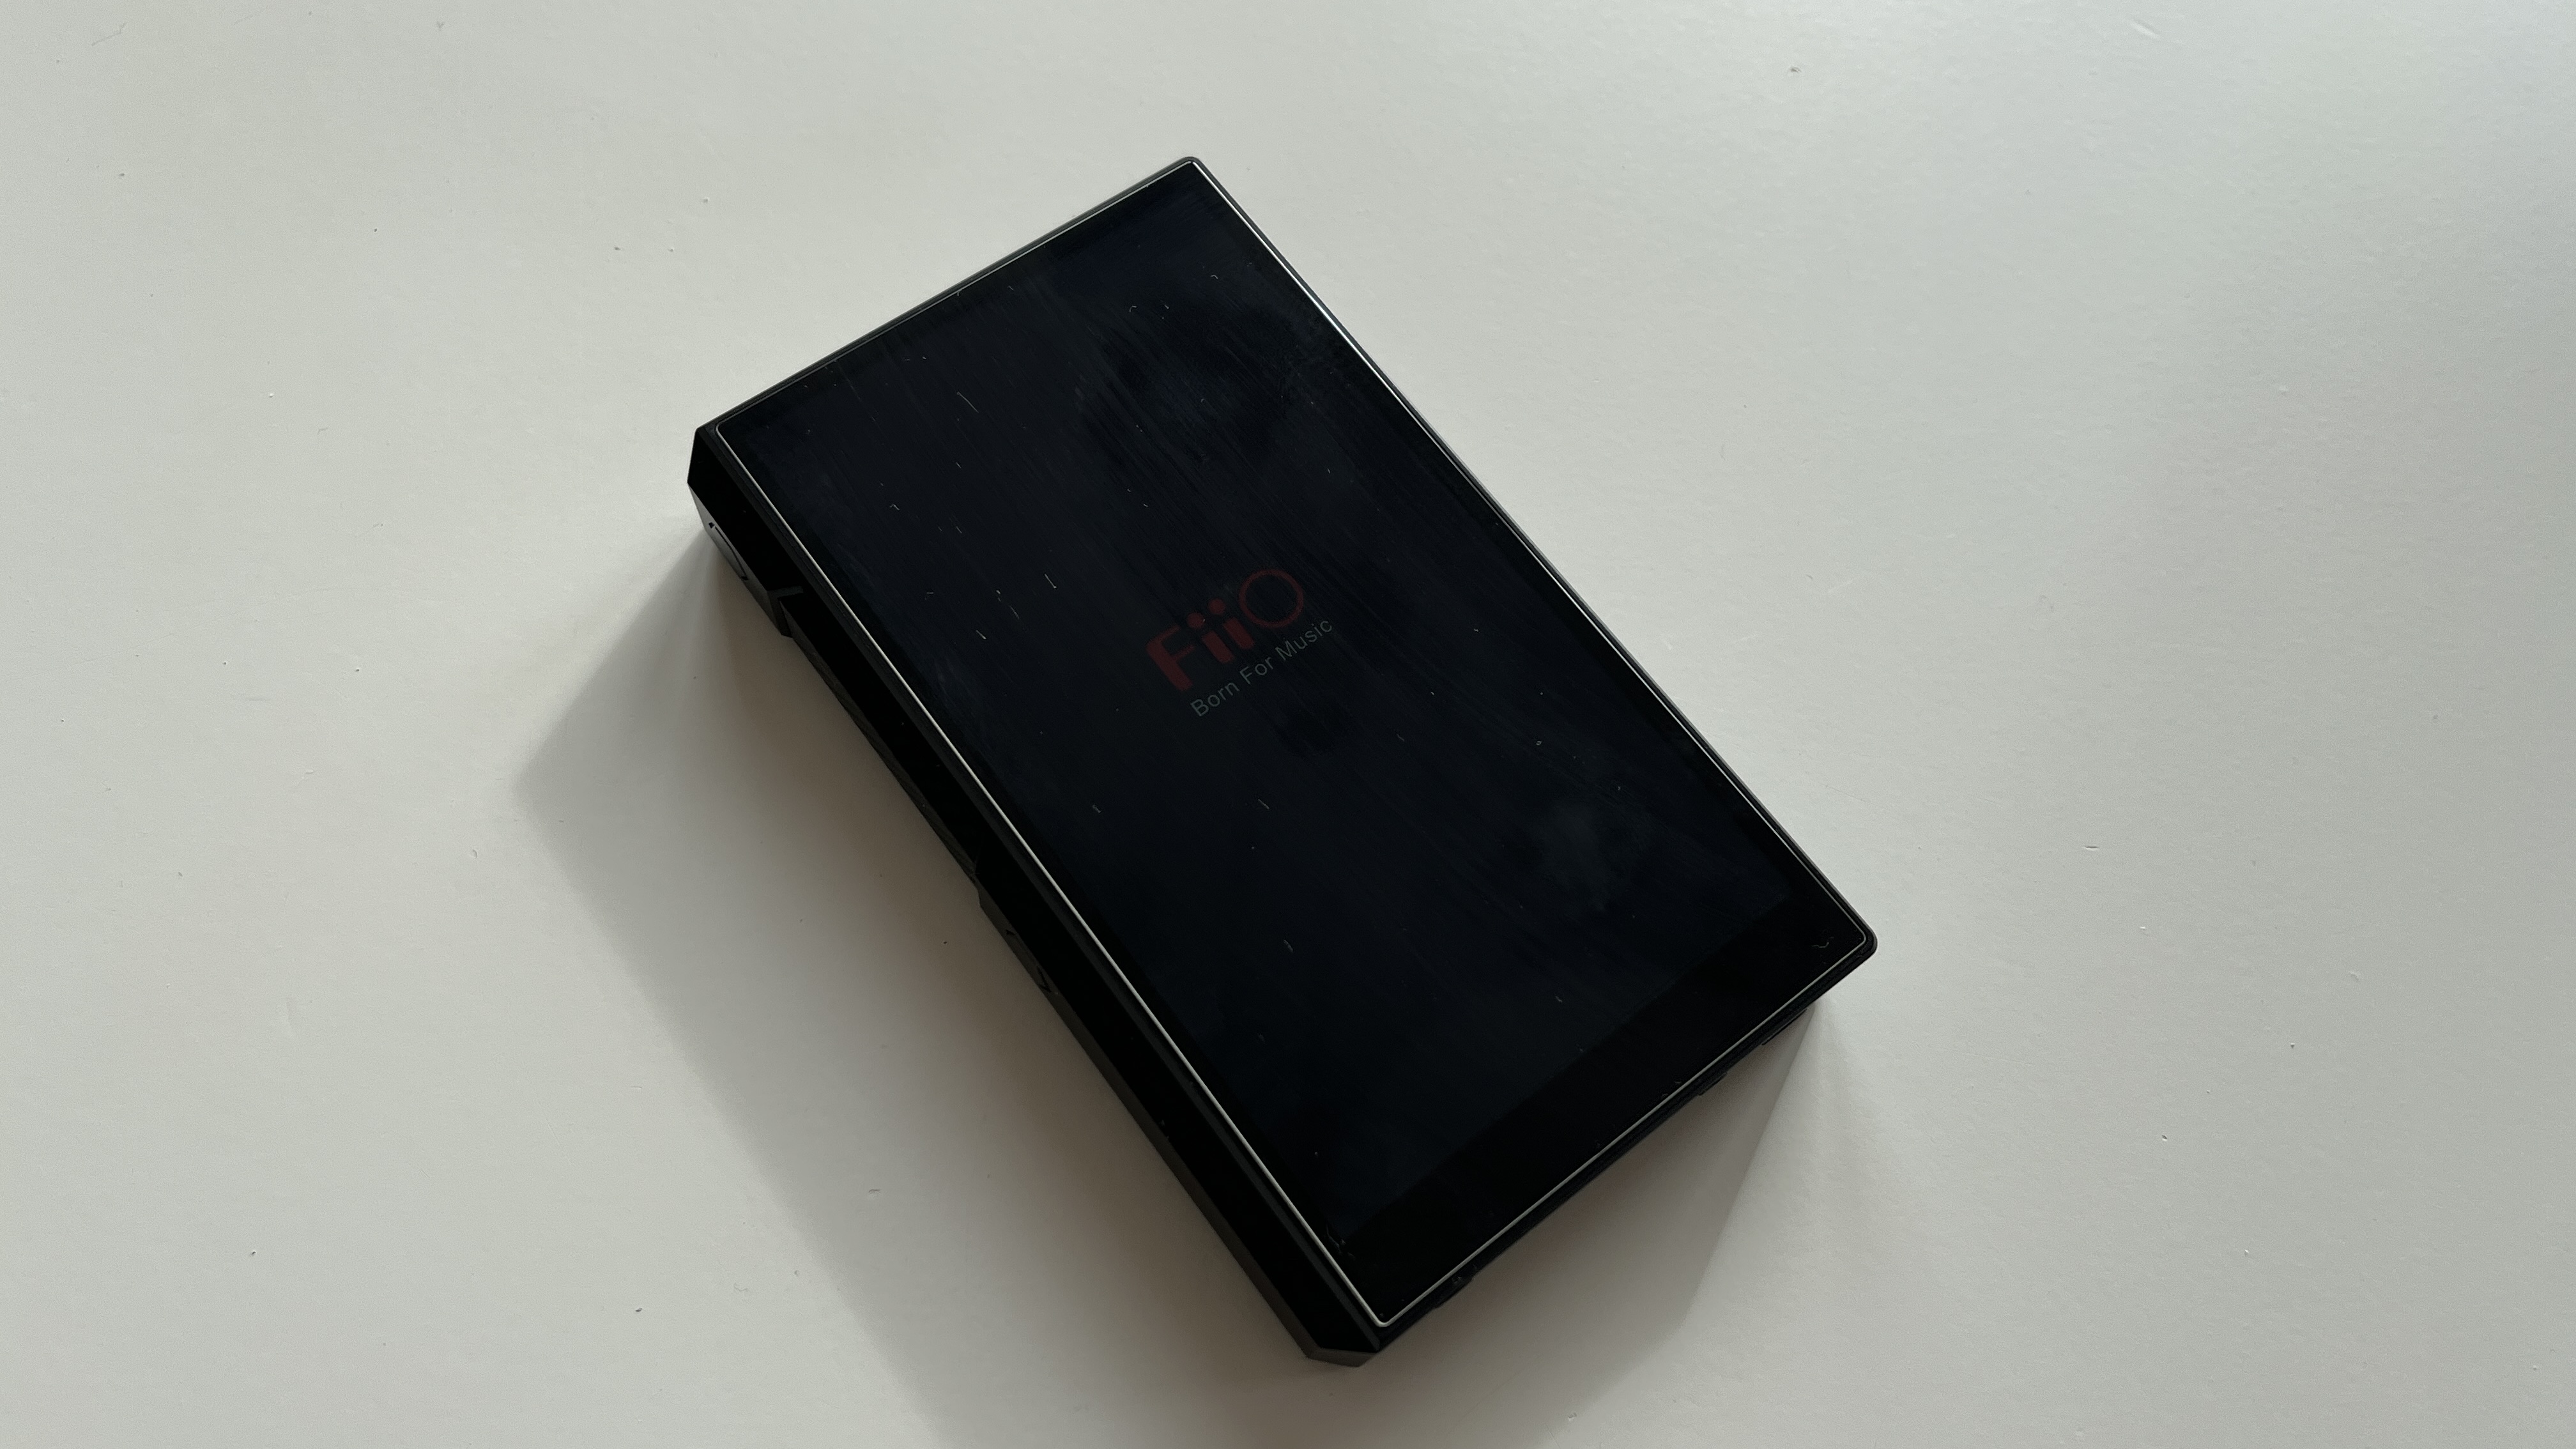 The FiiO M11S music player pictured with the screen off on a plain white surface